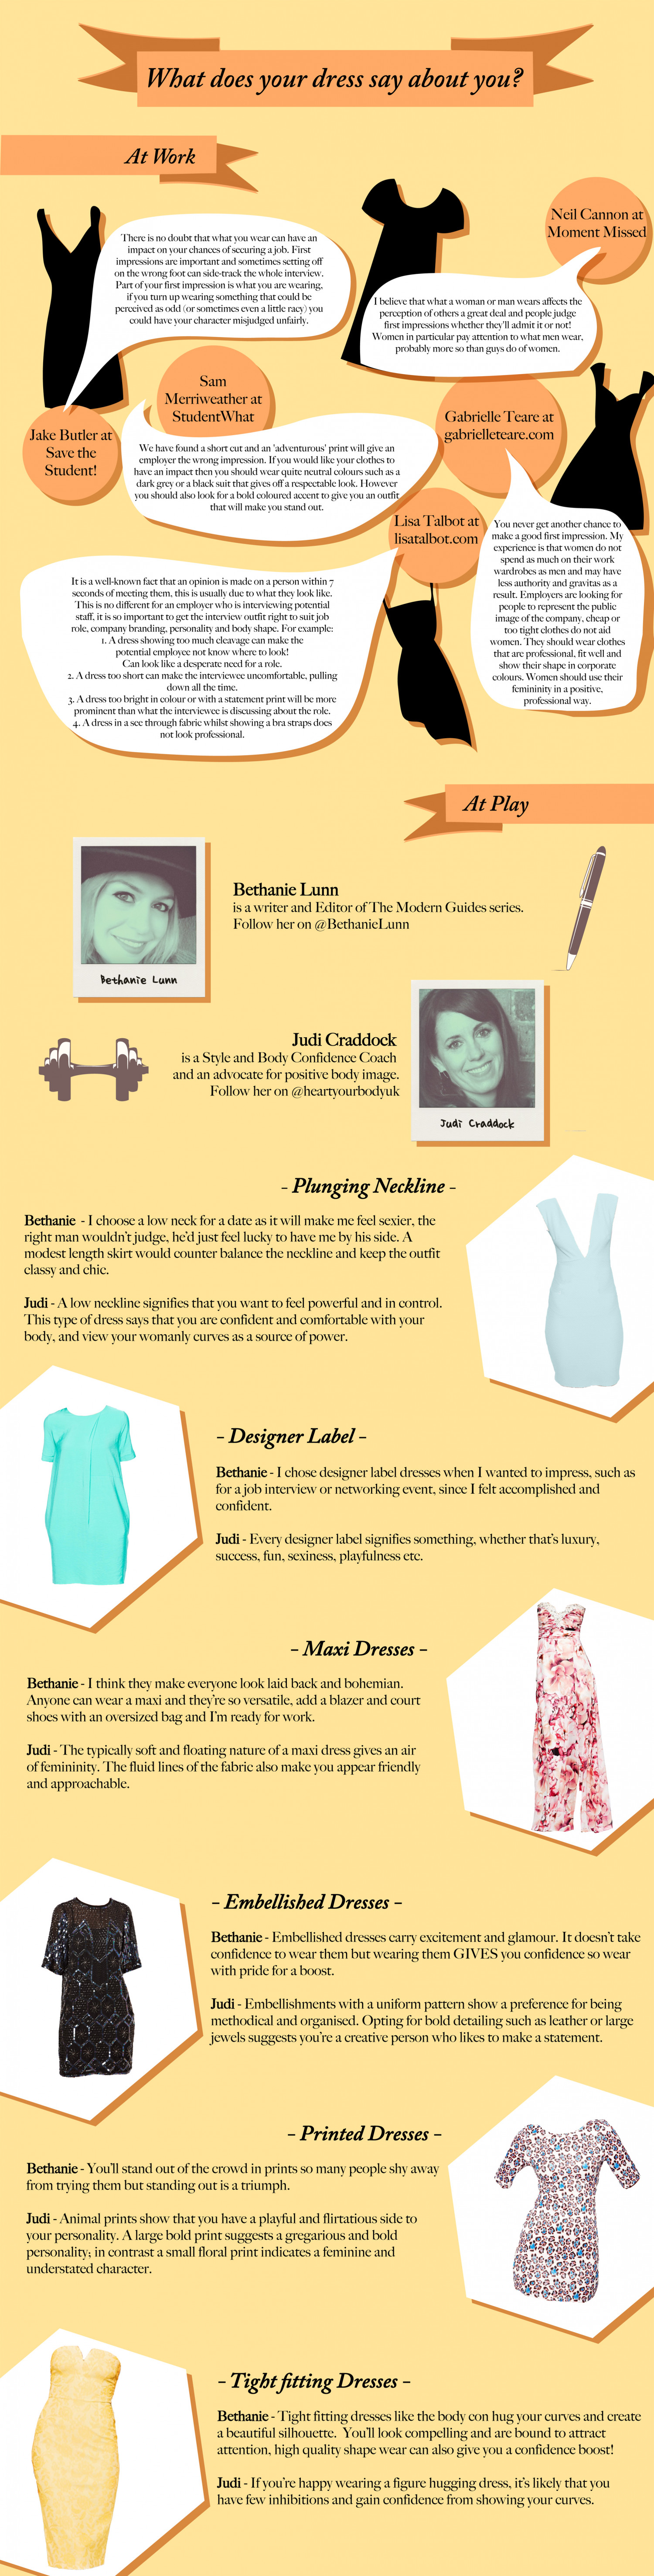 What Does Your Dress Say About You? Infographic